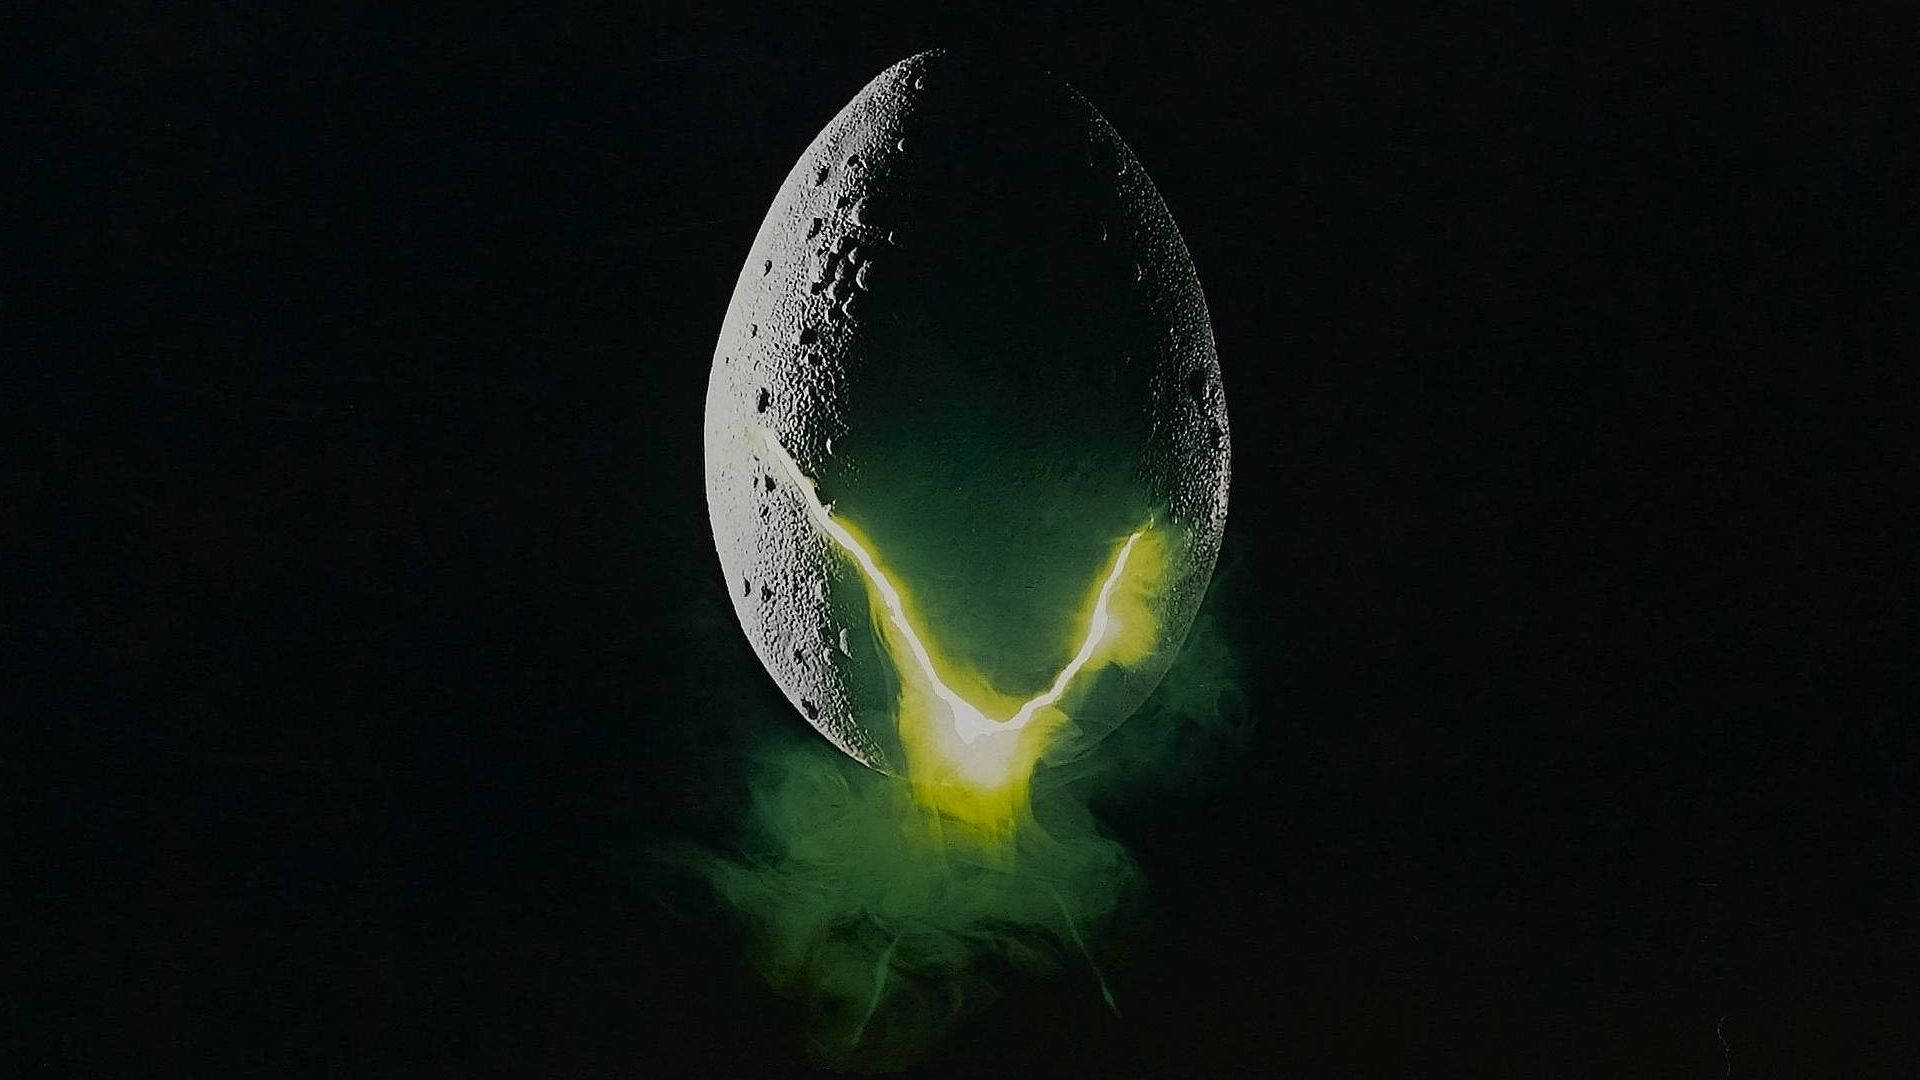 An egg-shaped spacecraft in an out-of-this-world setting Wallpaper